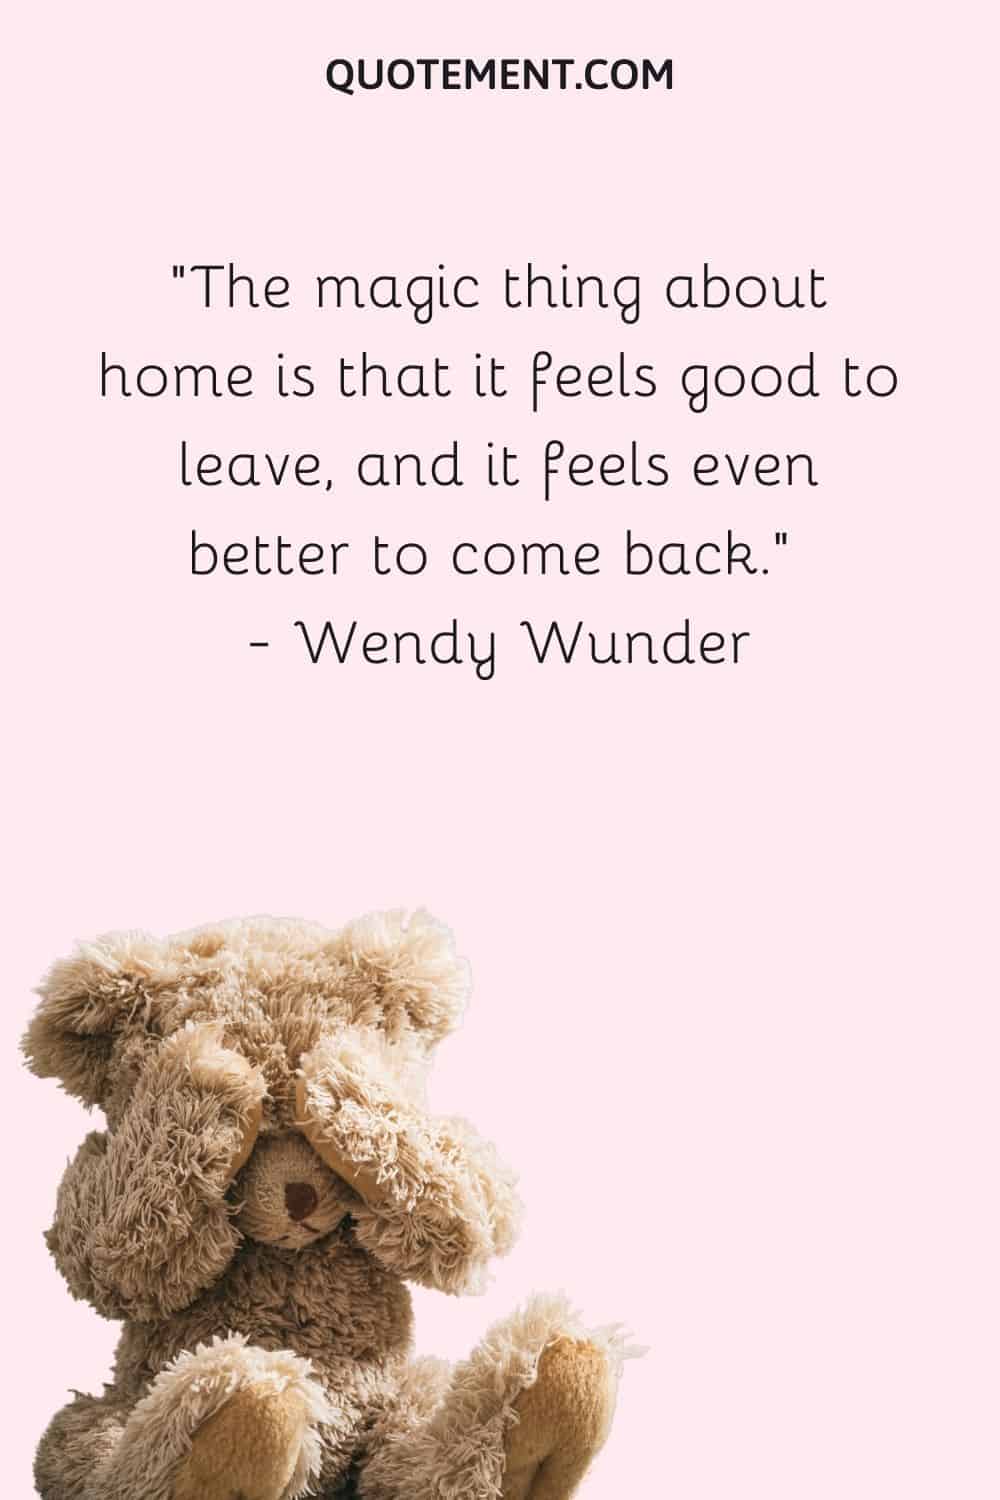 The magic thing about home is that it feels good to leave, and it feels even better to come back. — Wendy Wunder